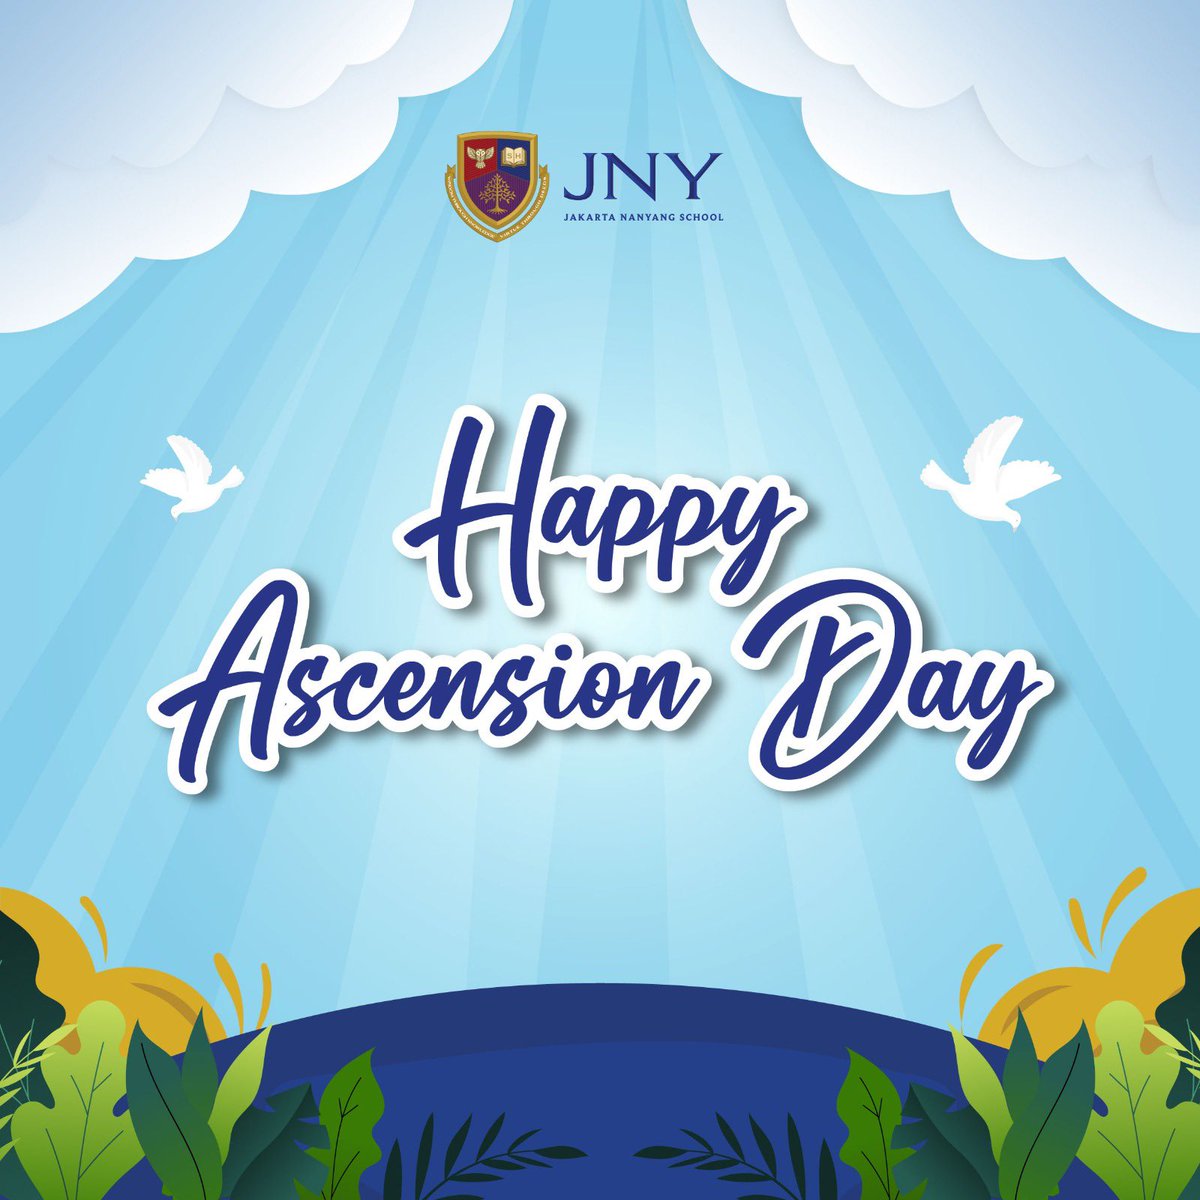 On this Ascension Day, may we elevate our hearts with gratitude, our minds with wisdom, and our souls with purpose. Wishing you a journey filled with divine blessings and inner peace.

#JNYSchool #children #school #Kindergarten #PrimarySchool #SecondarySchool #JuniorCollege